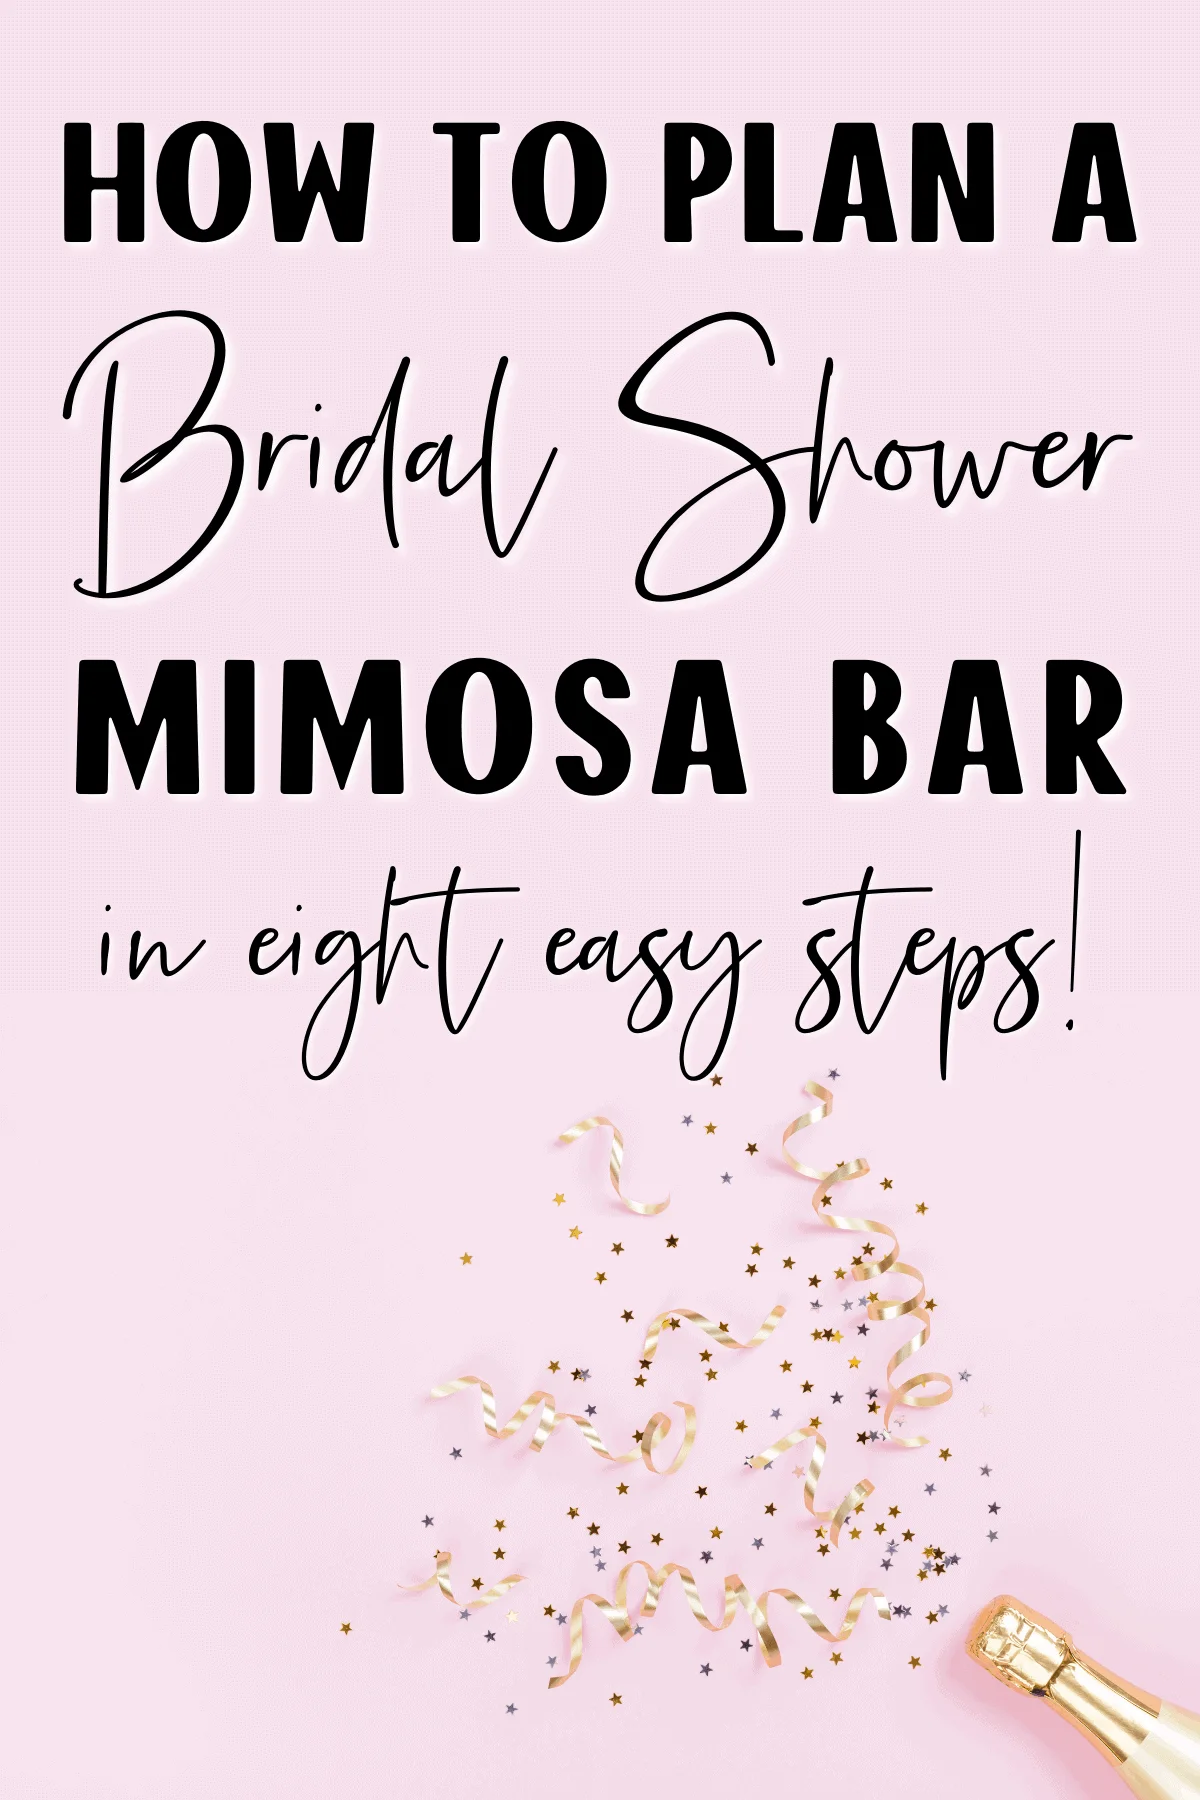 How to Plan the Perfect DIY Mimosa Bar for Your BFF’s Bridal Shower